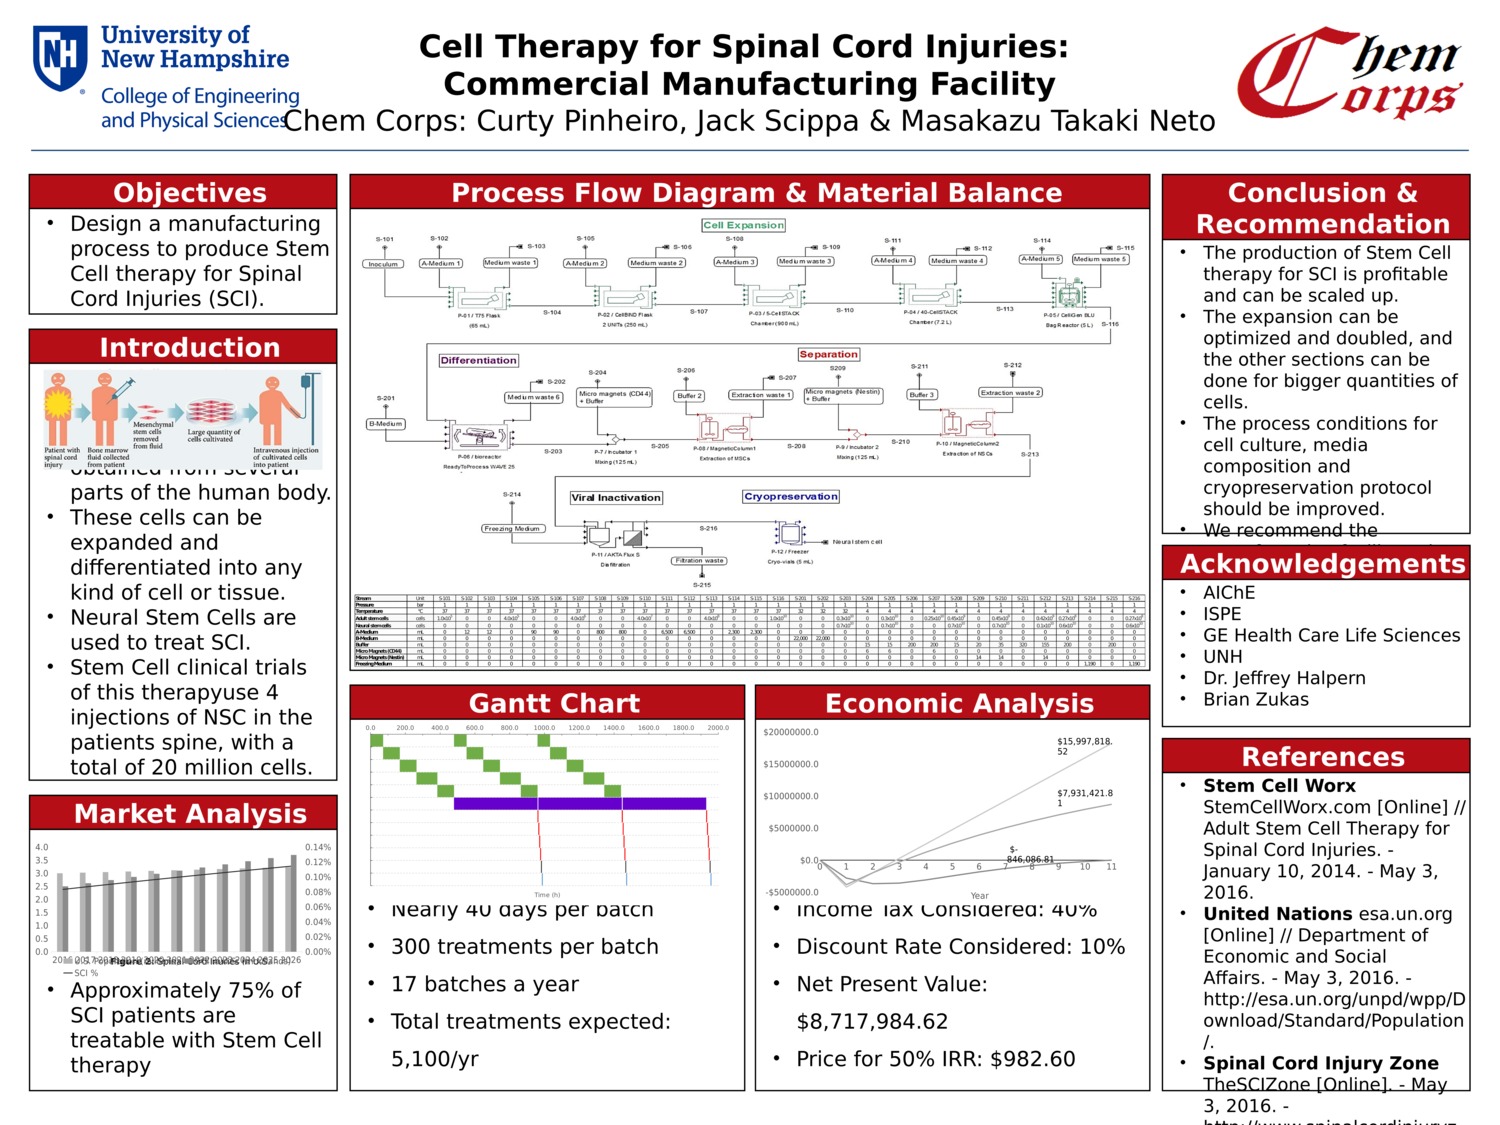 Chemcorps "Cell Therapy For Spinal Cord Injuries: Commercial Manufacturing Facility" by ca1040